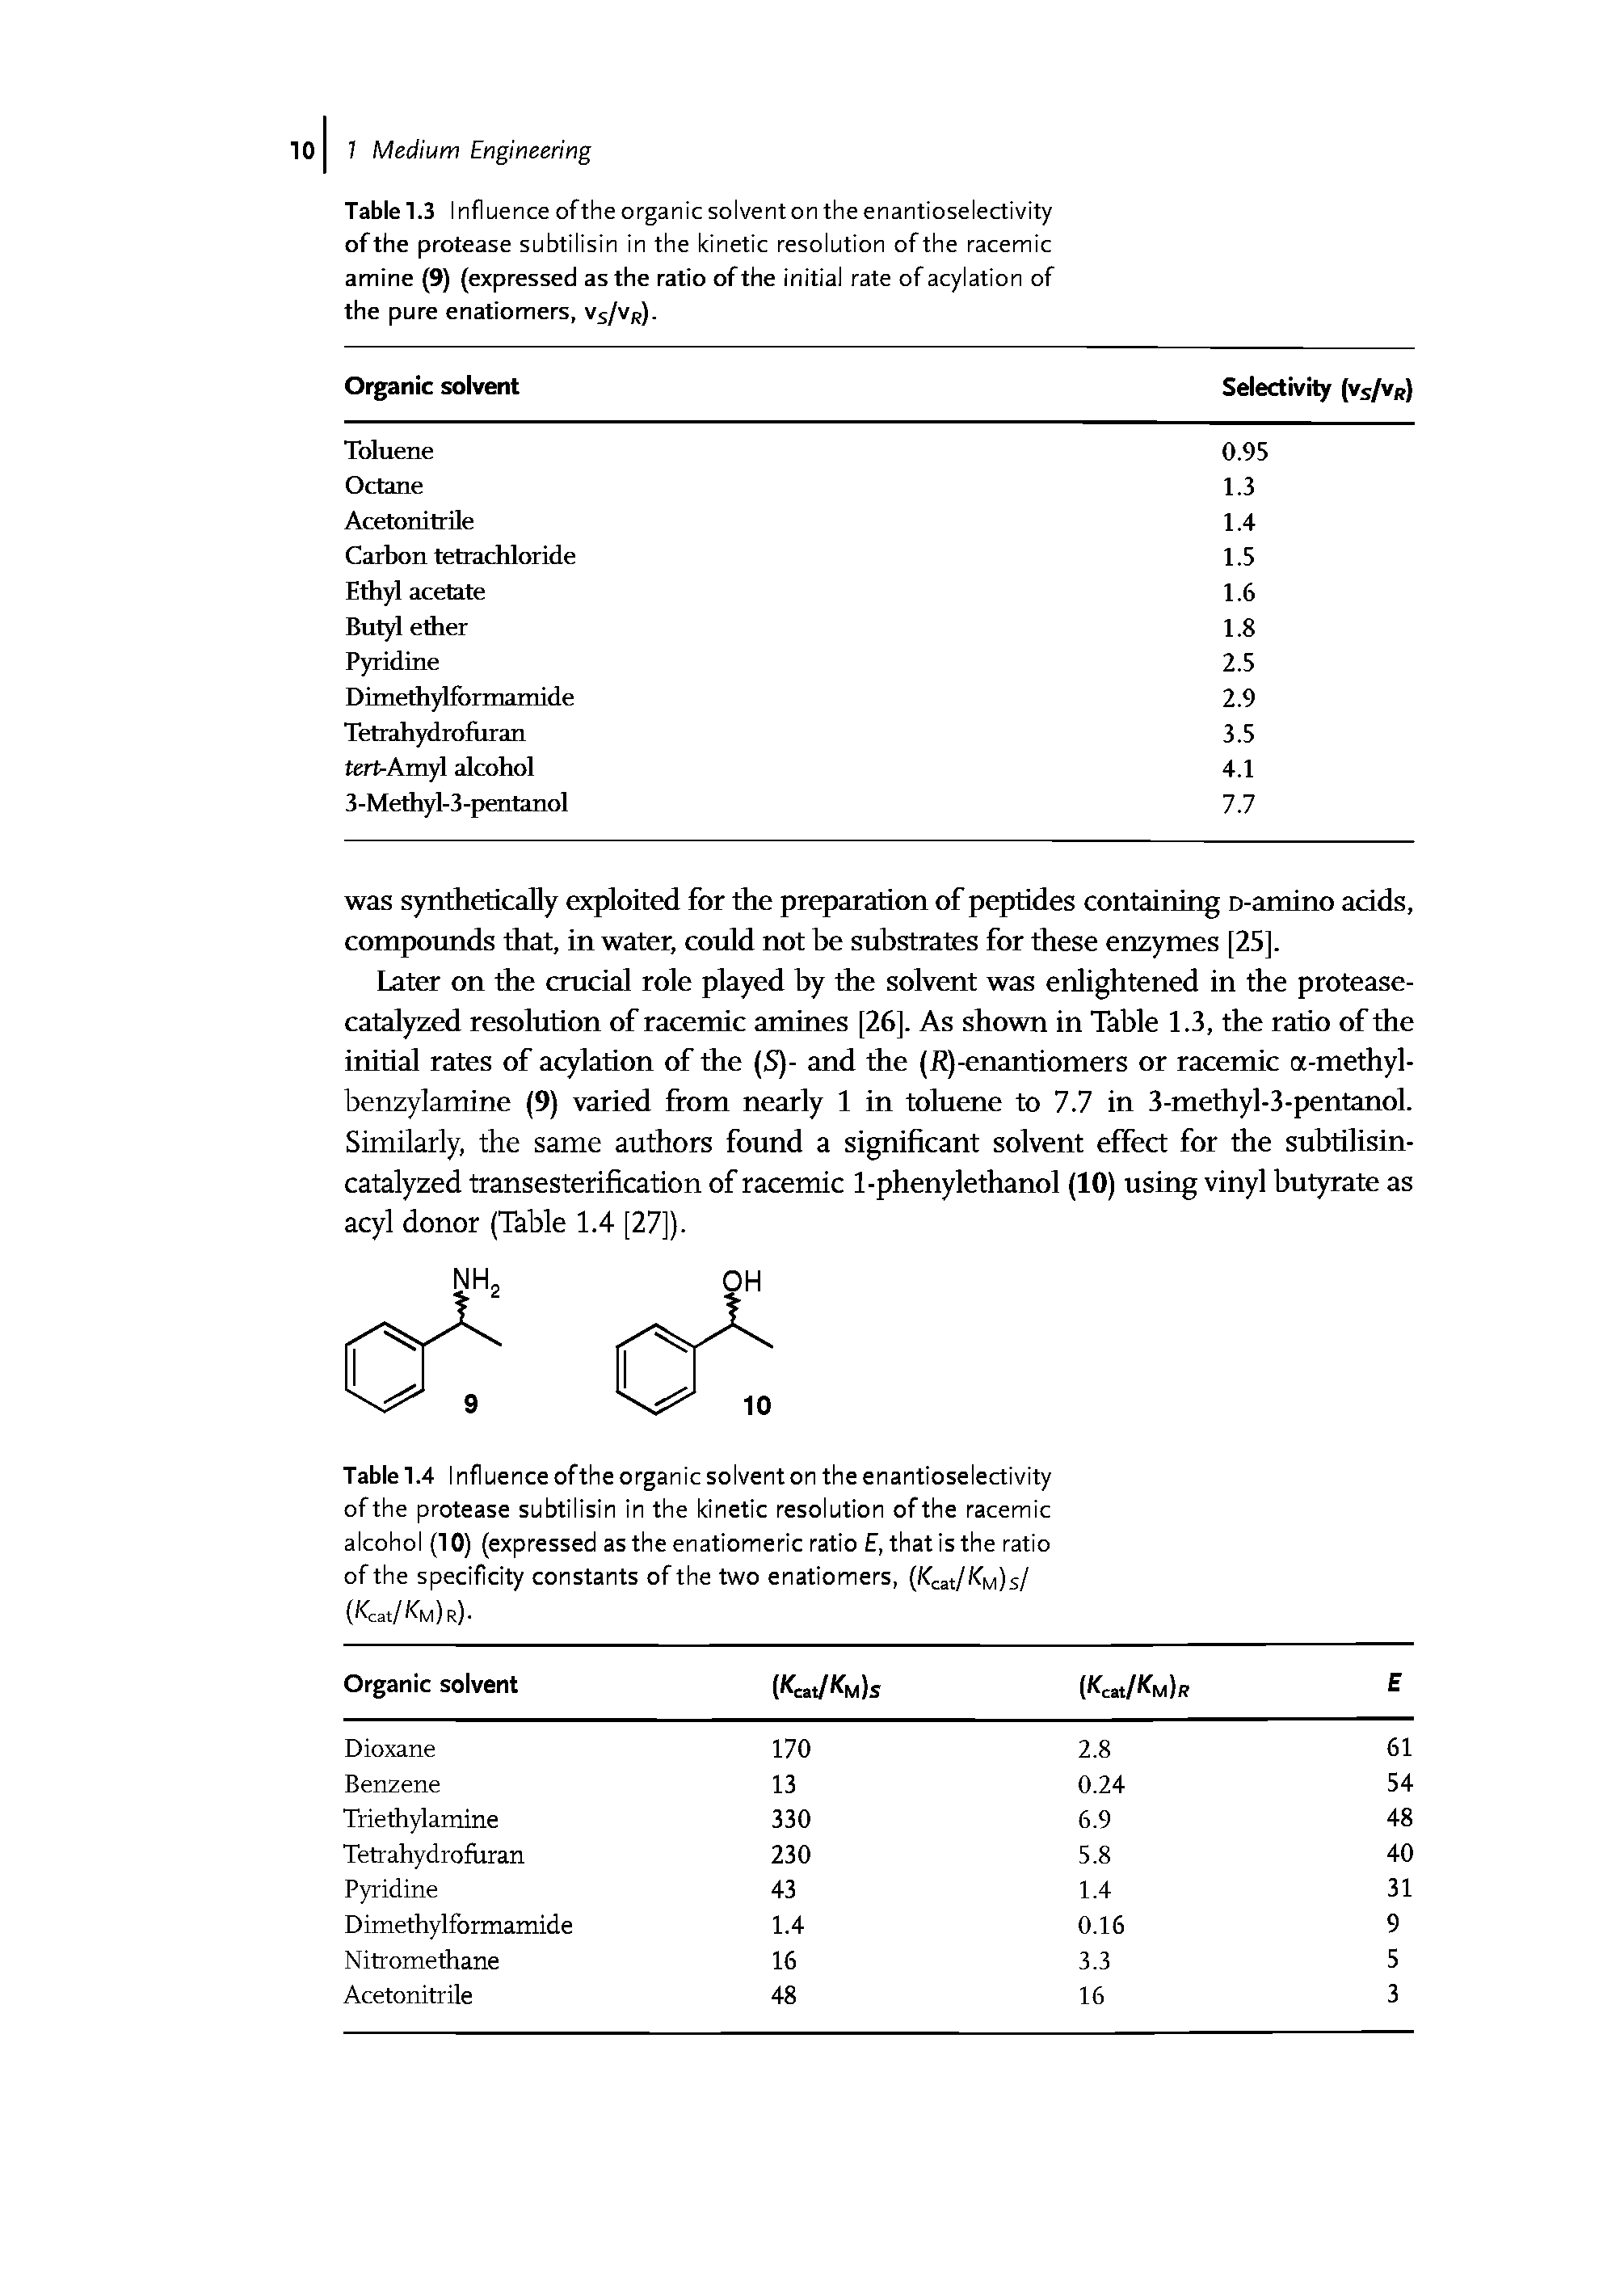 Table 1.3 Influence ofthe organic solvent on the enantioselectivity of the protease subtilisin in the kinetic resolution ofthe racemic amine (9) (expressed as the ratio ofthe initial rate of acylation of the pure enatiomers, Vs/vr).